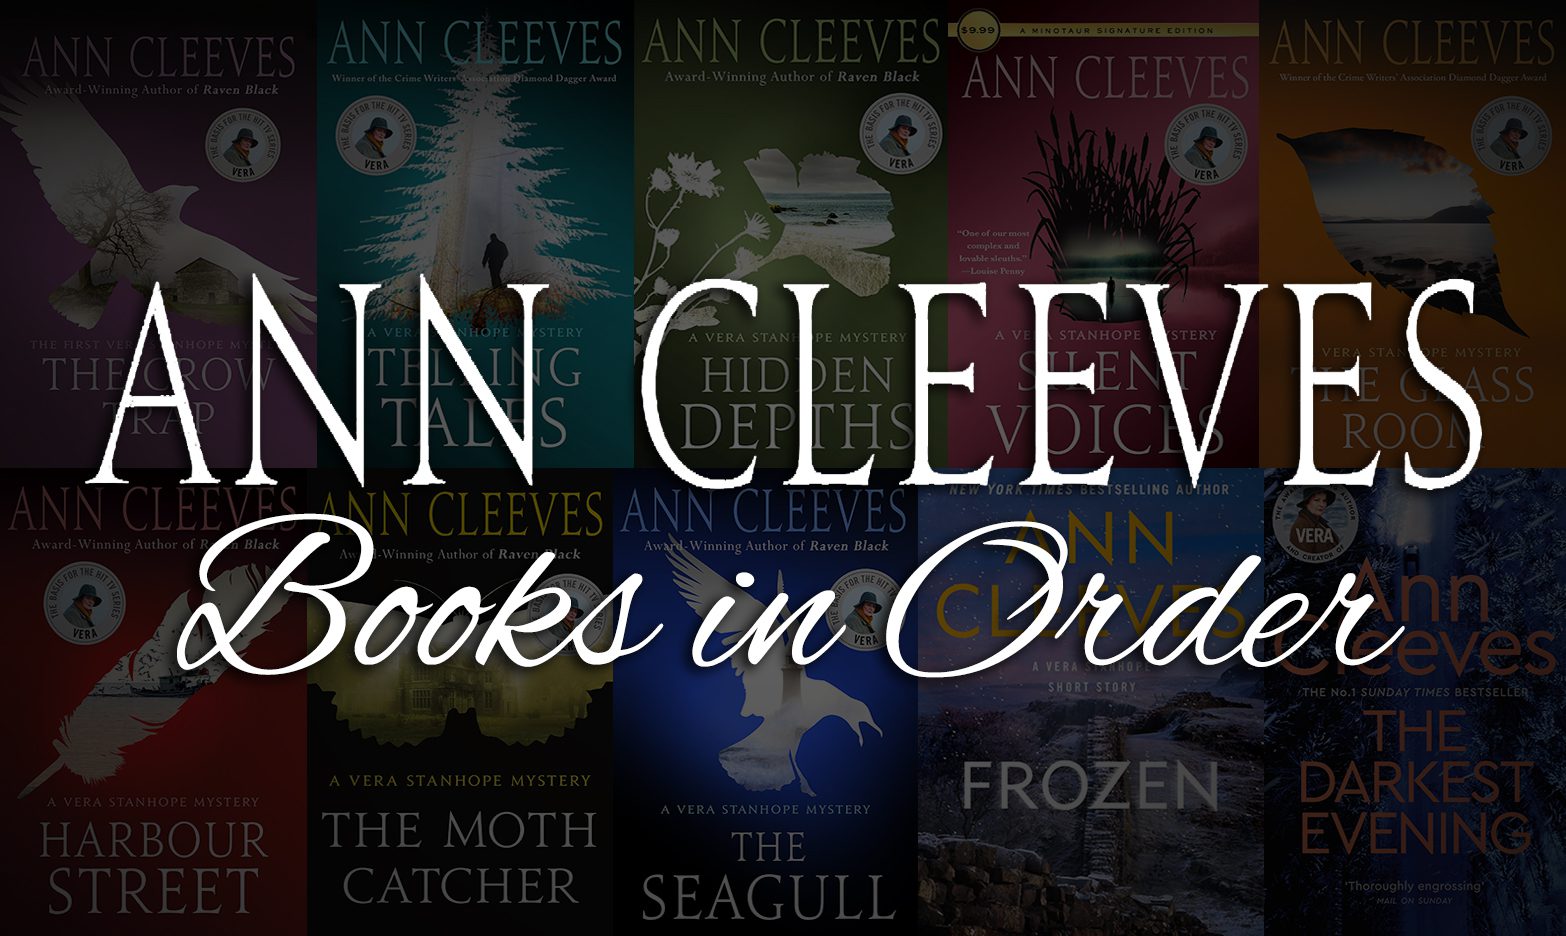 Ann Cleeves Books in Order Guide 40+ Books]